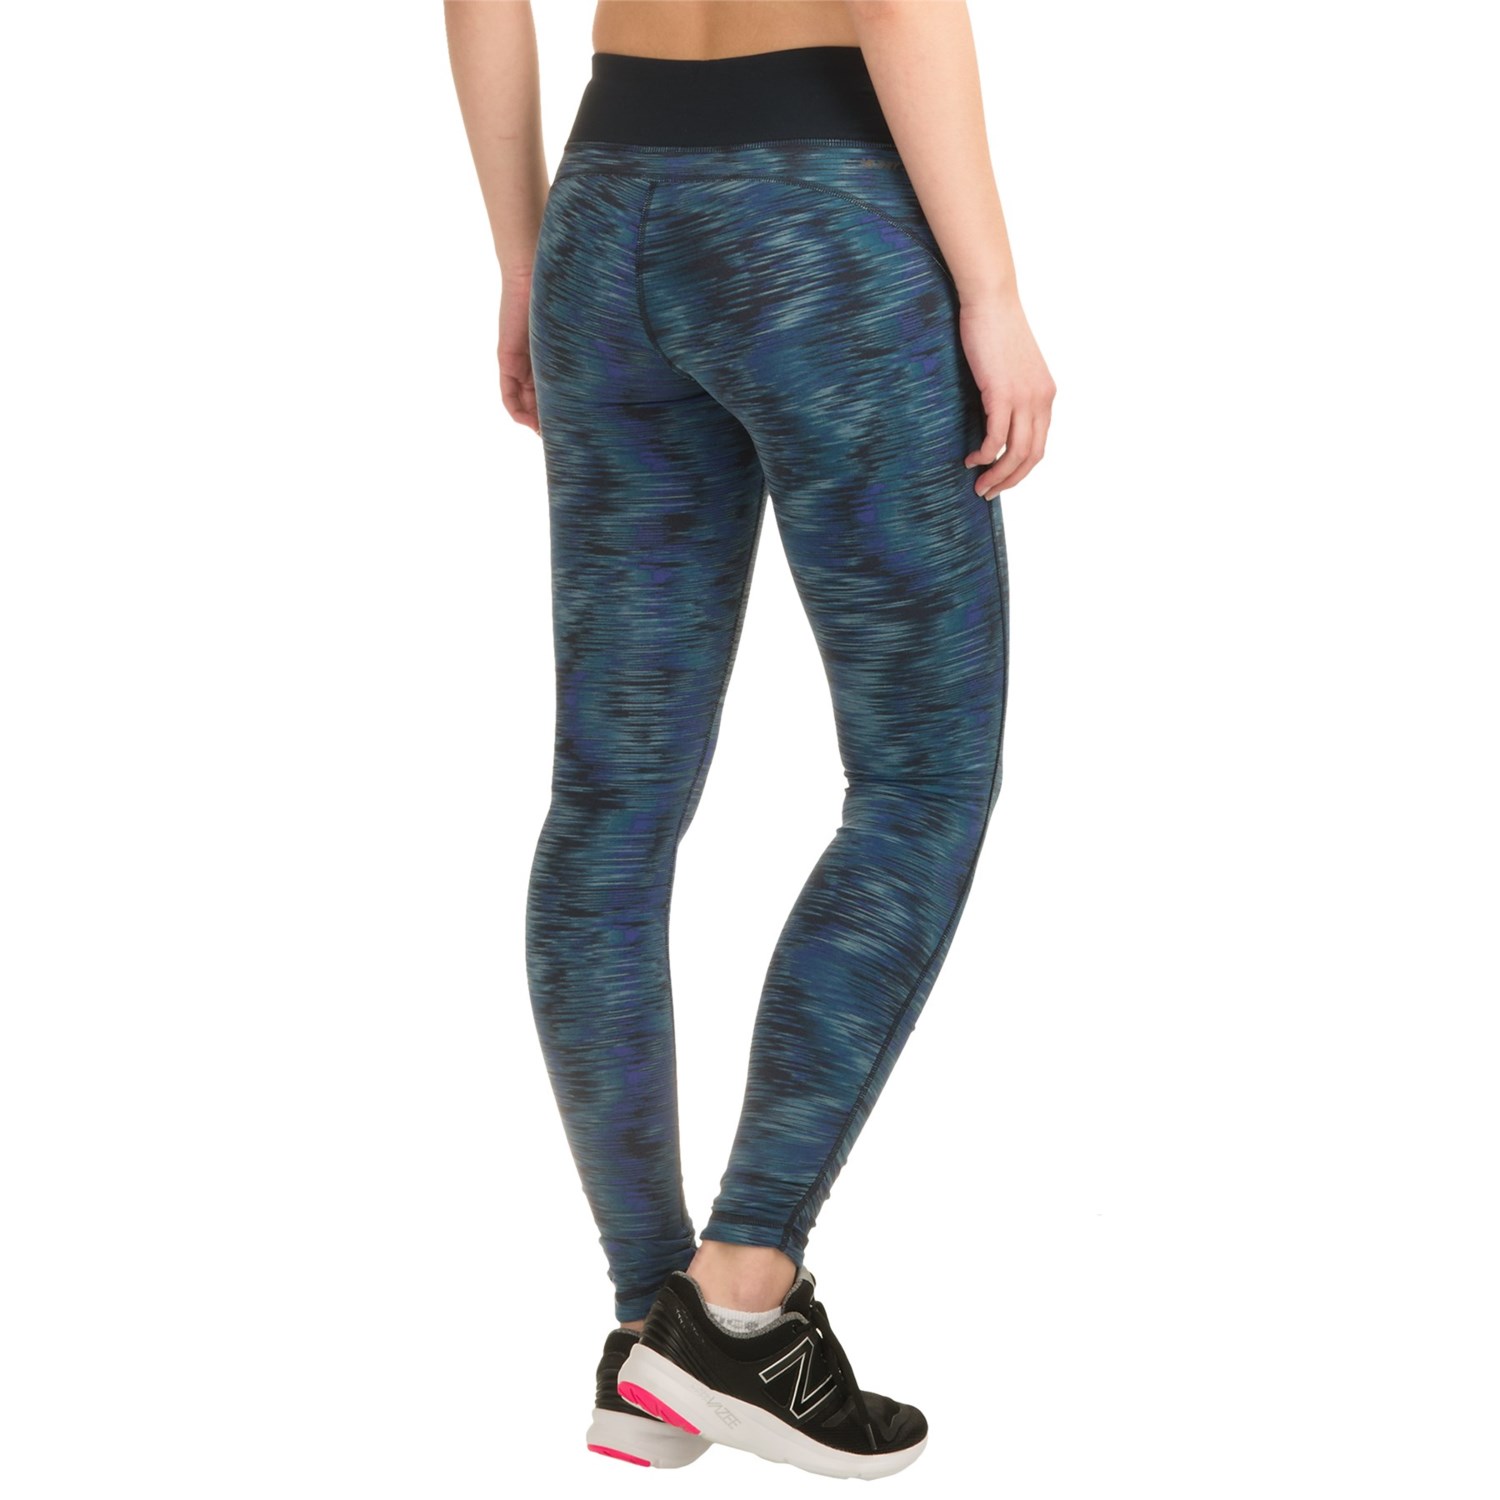 New Balance Printed High-Performance Running Tights (For Women) 182TM ...